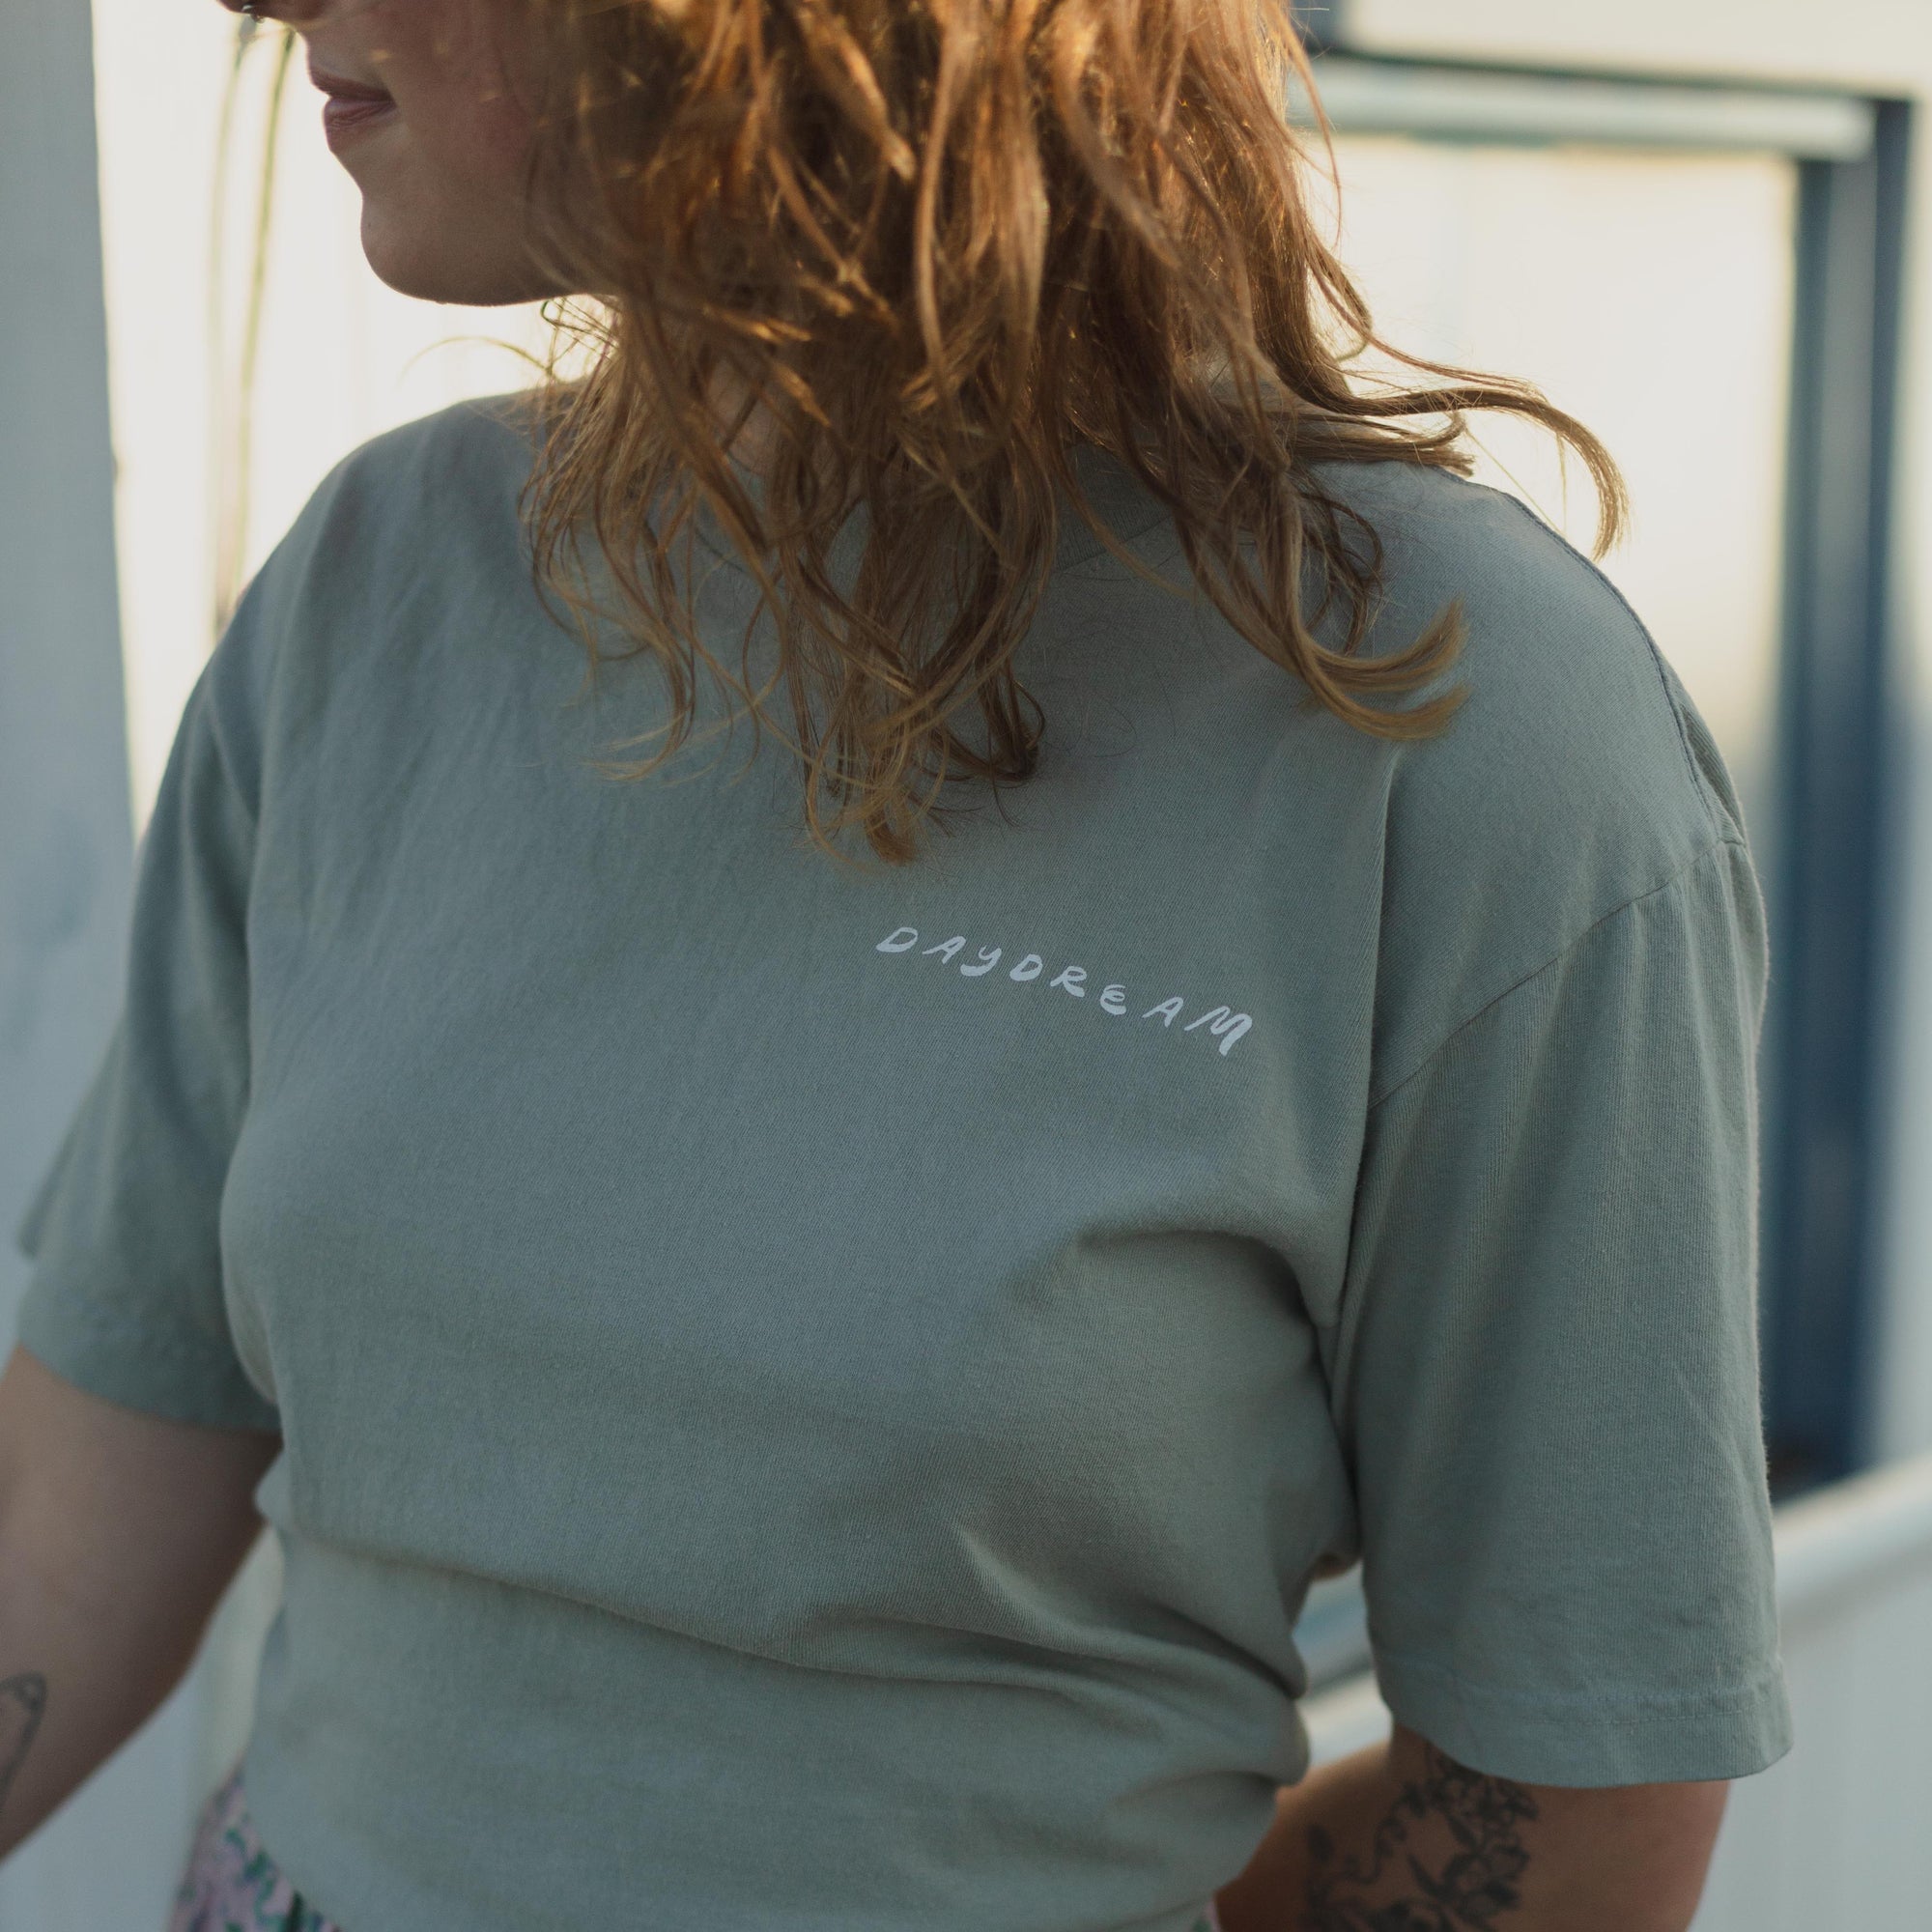 Daydream Down the Line Tee - Sage Green